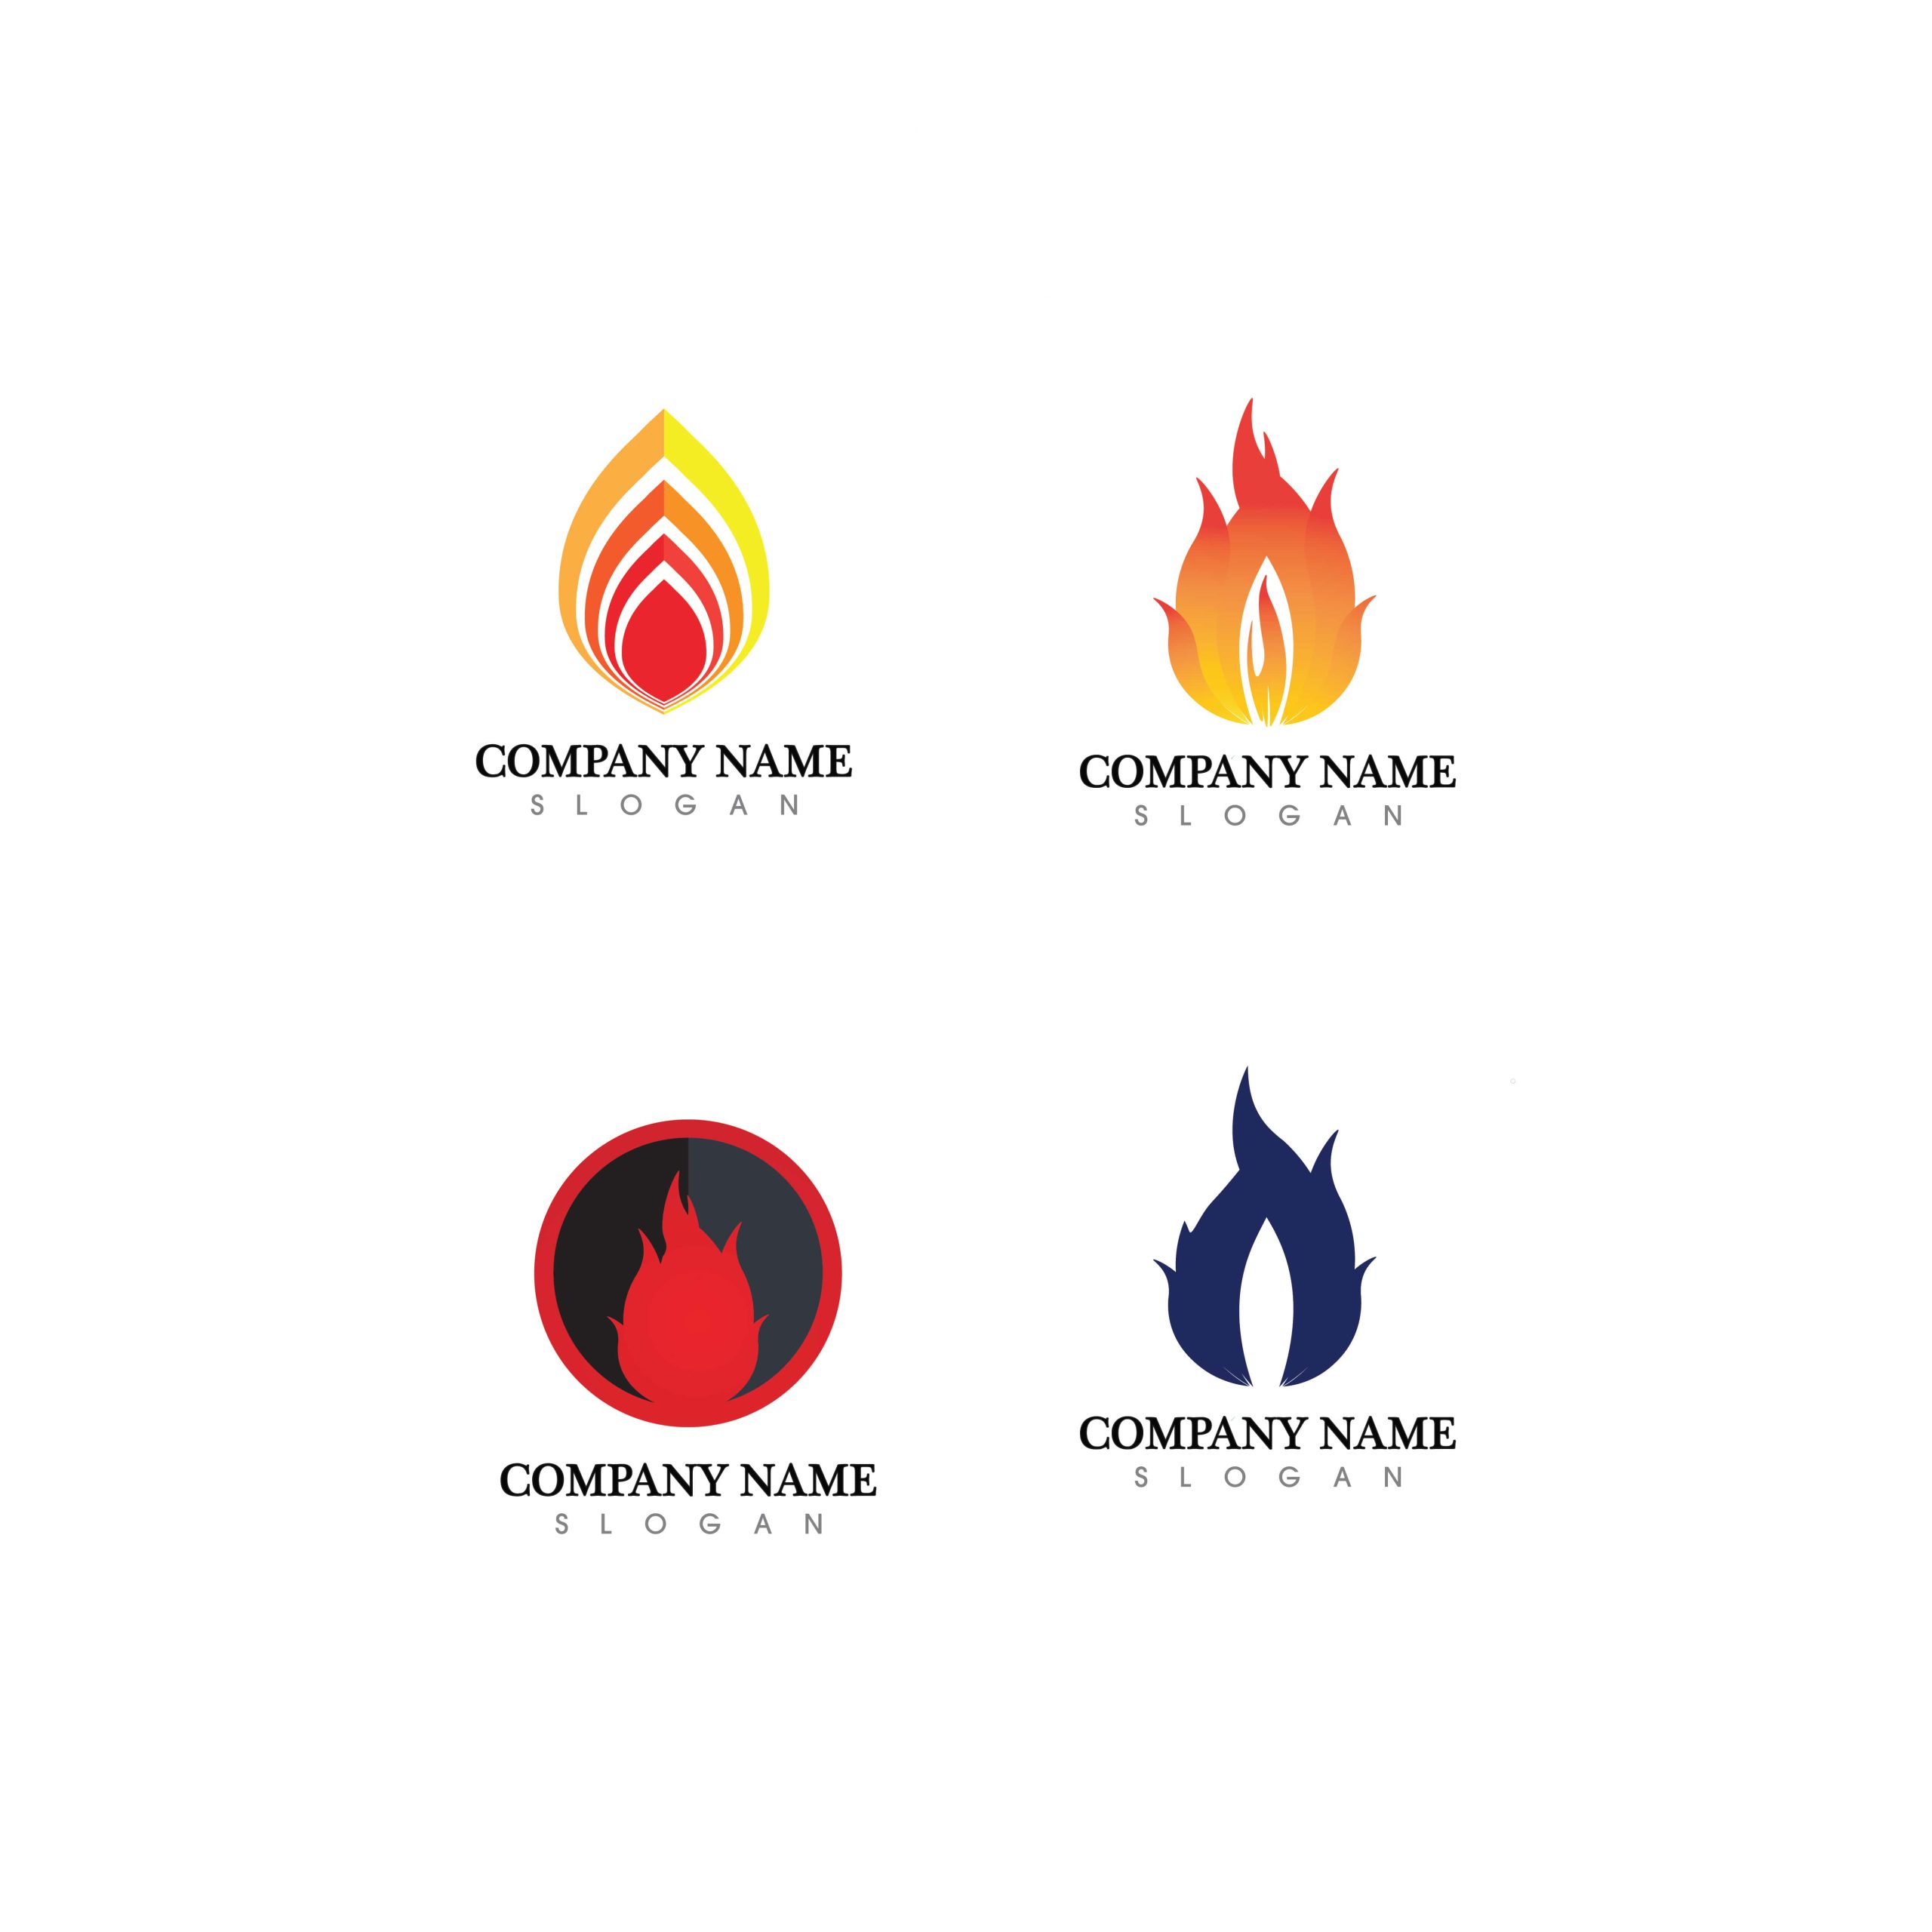 Fire flat logo and flame set vector icon, hot flaming element vector flame illustration design energy, warm, warning, cooking sign, logo, icon, light, power heat, abstract